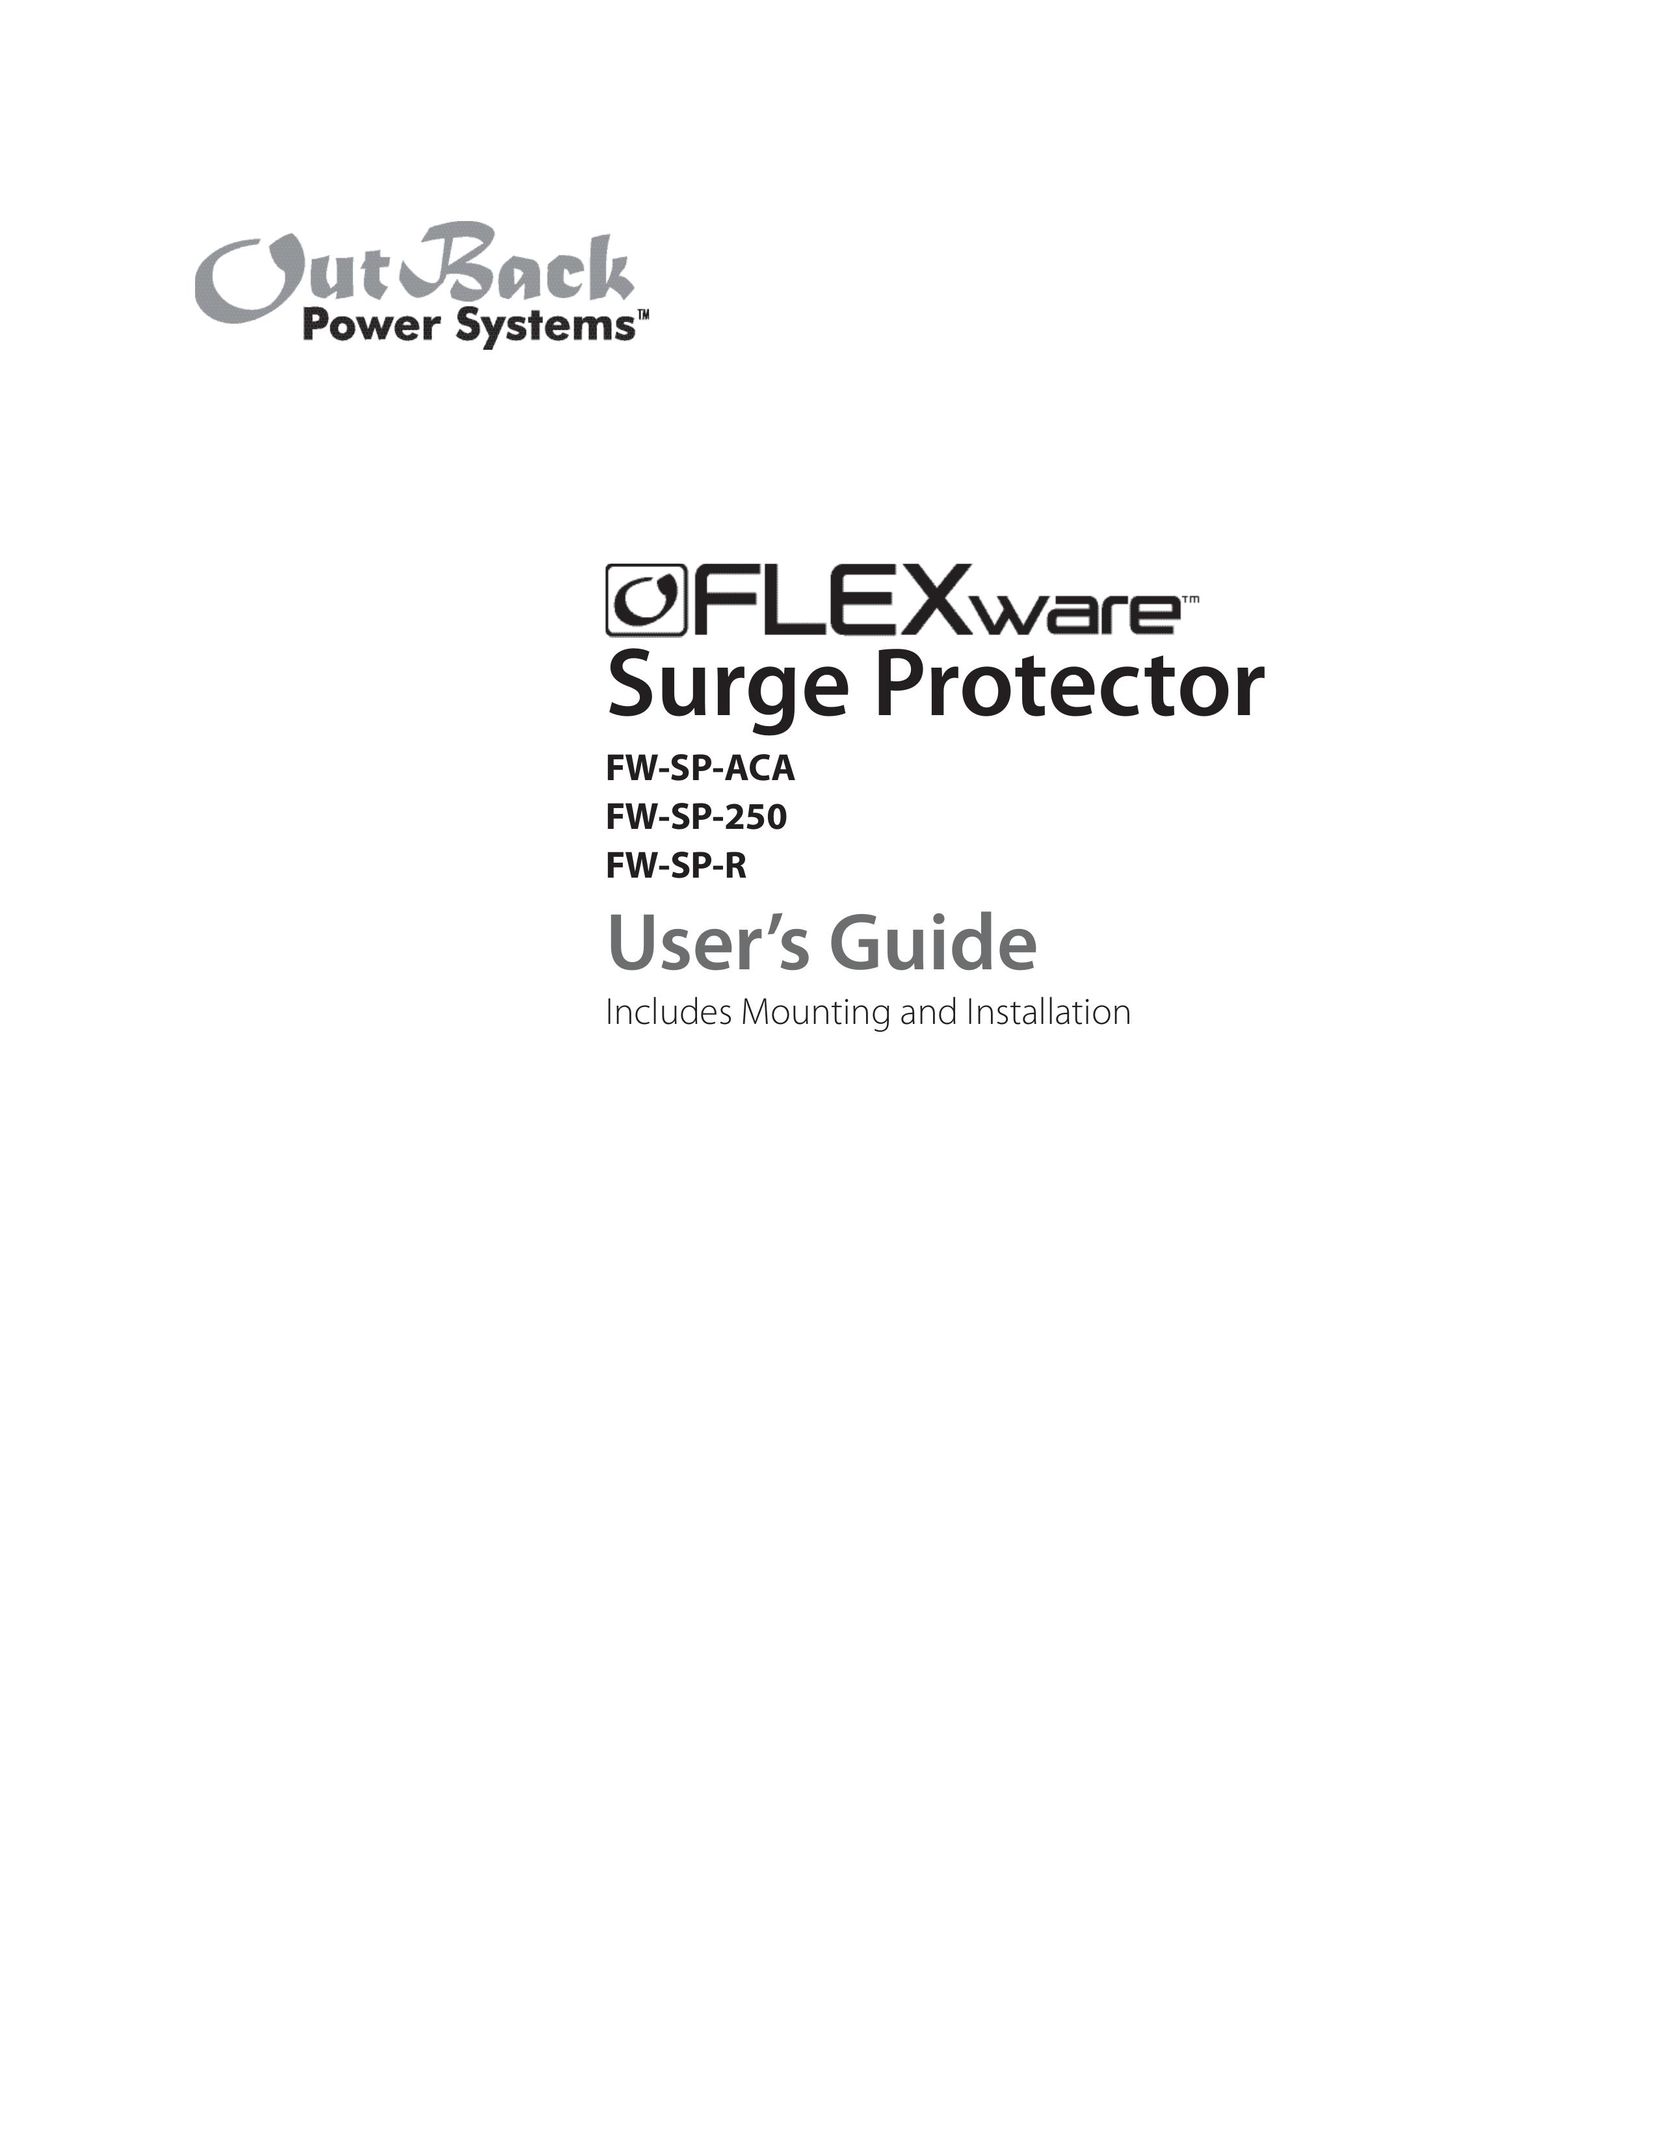 Outback Power Systems FW-SP-R Surge Protector User Manual